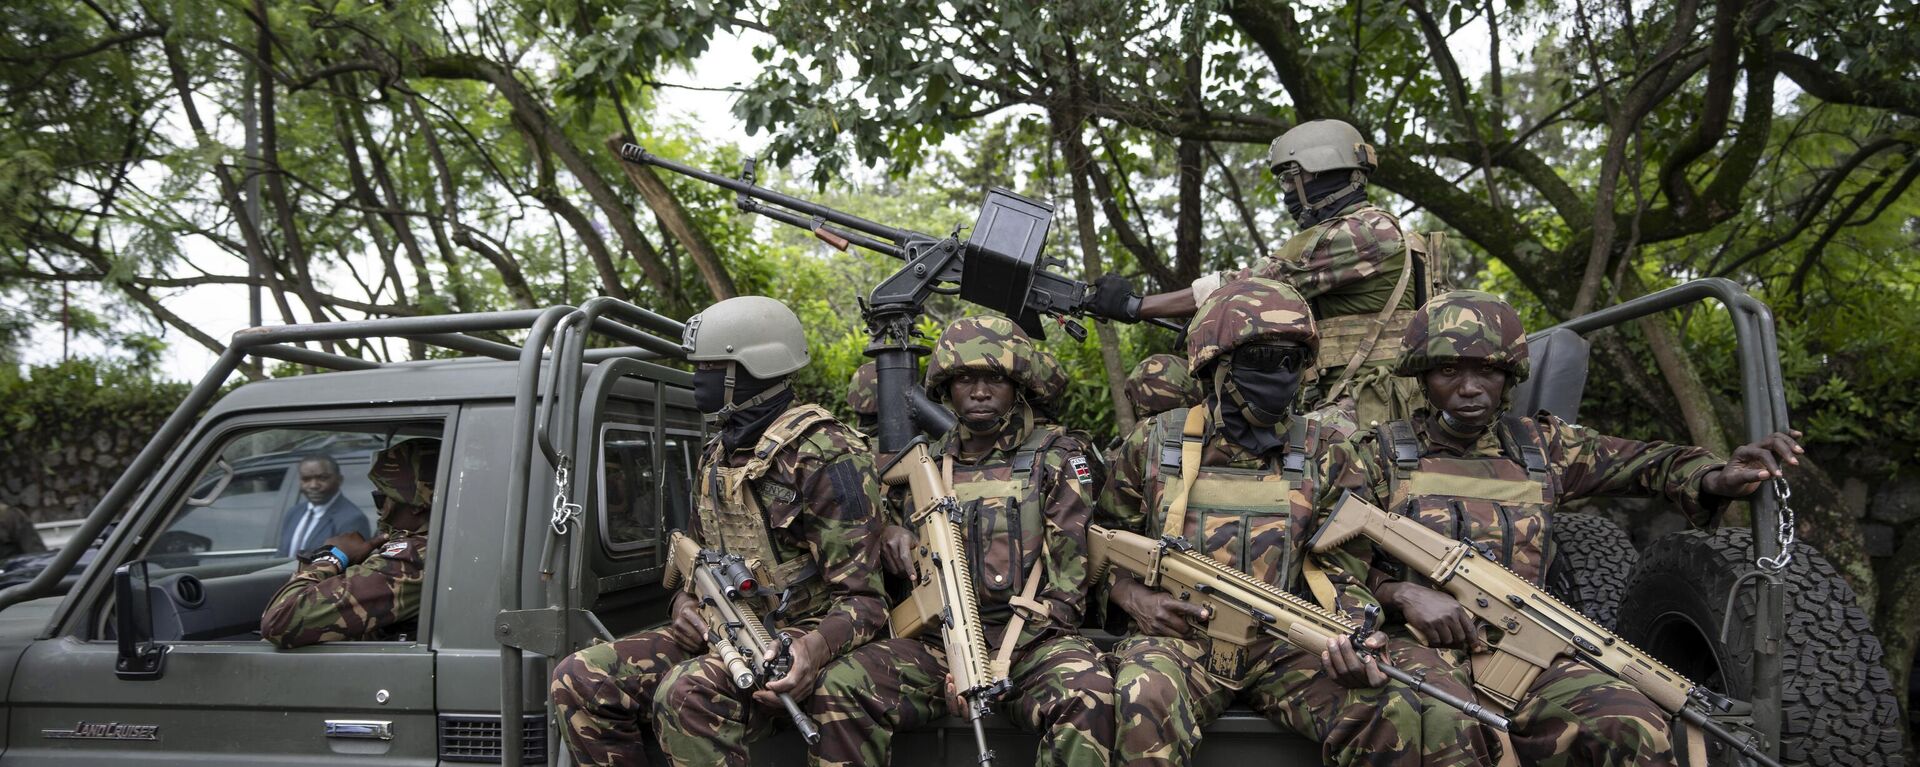 Members of the Kenya Defence Forces (KDF) deployed as part of the East African Community Regional Force (EACRF) ride in a vehicle in Goma, in eastern Congo Wednesday, Nov. 16, 2022 - Sputnik International, 1920, 22.01.2023